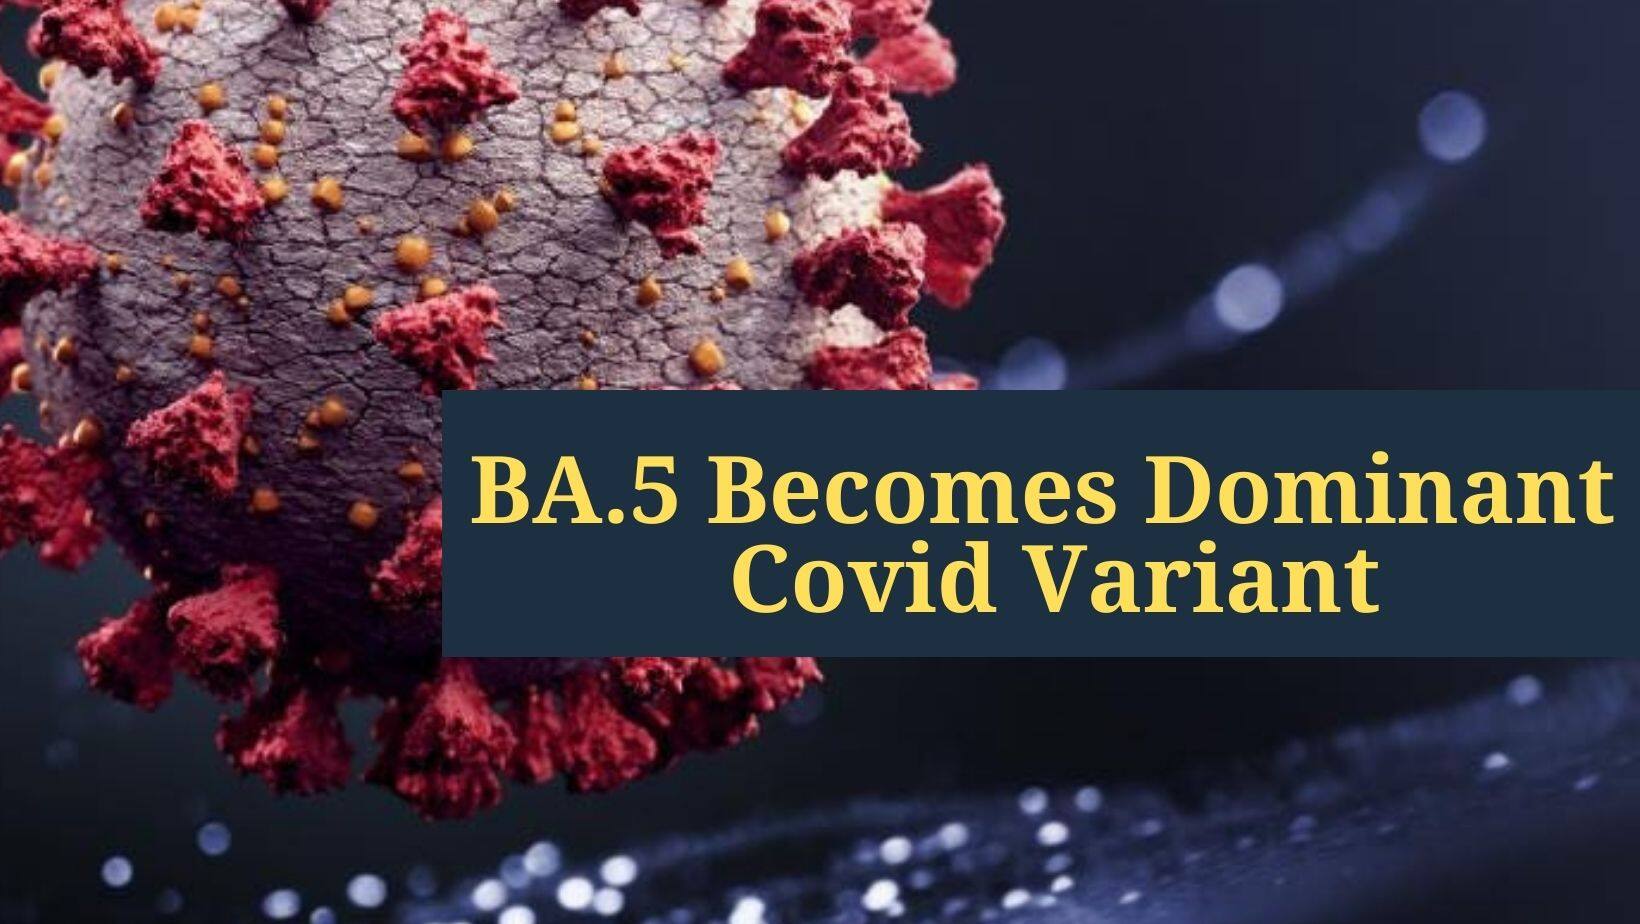 Omicron BA.5 Becomes Dominant COVID Variant In Germany: 7 Key Symptoms To Watch Out For